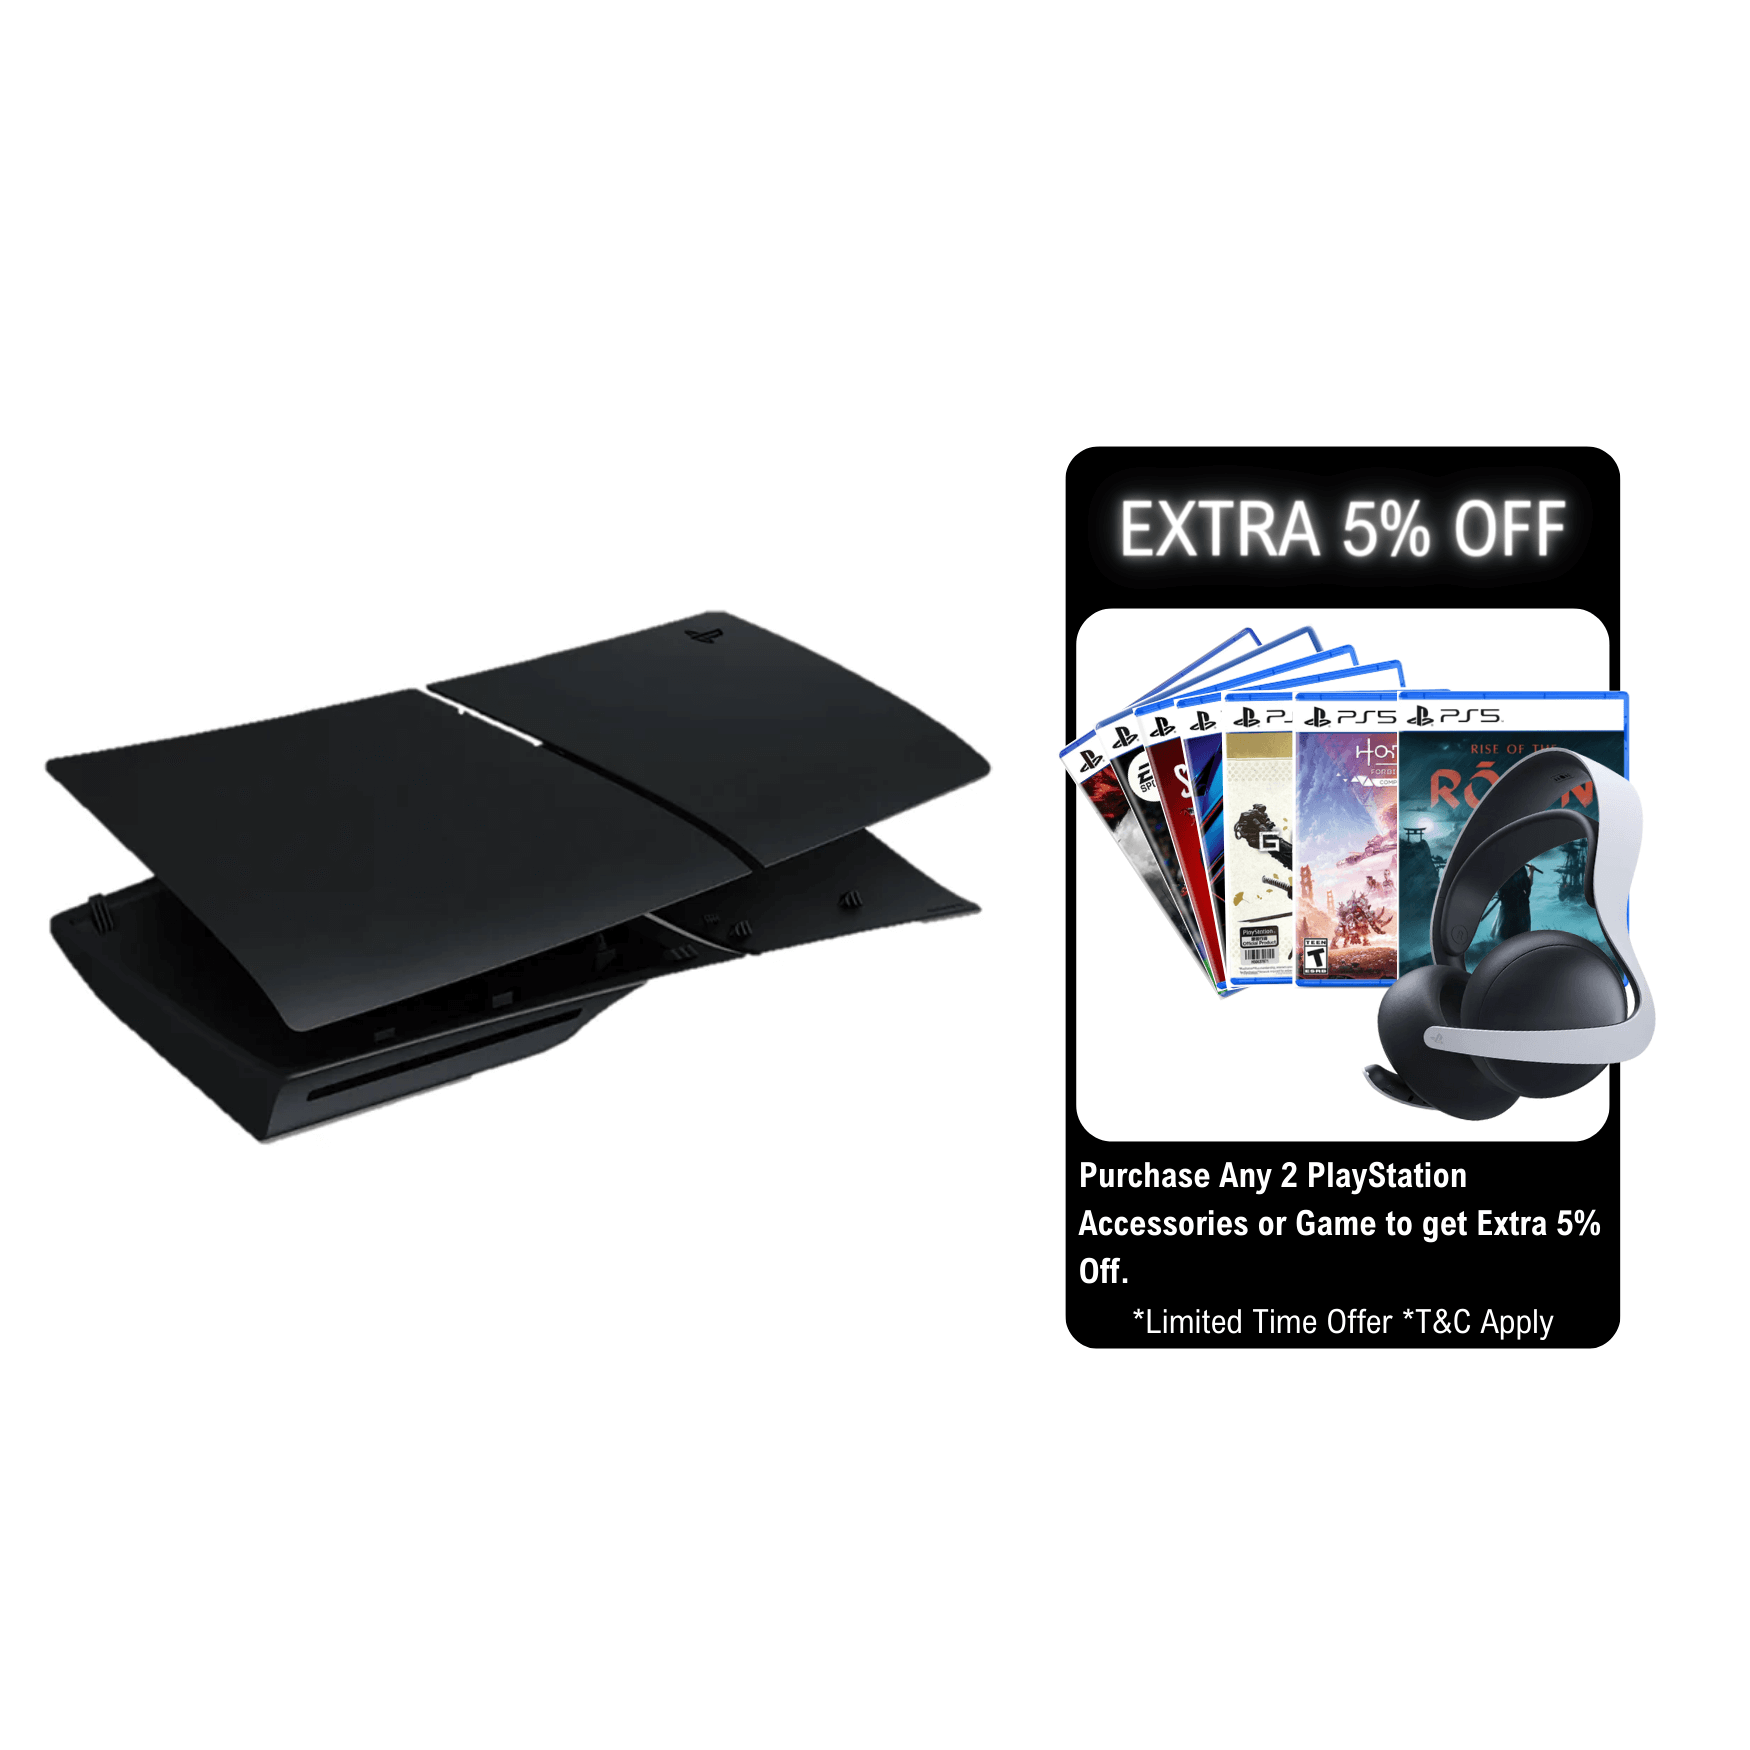 Sony PS5 Slim PlayStation 5 Slim Console Cover [PS5 ANY 2 5% OFF]